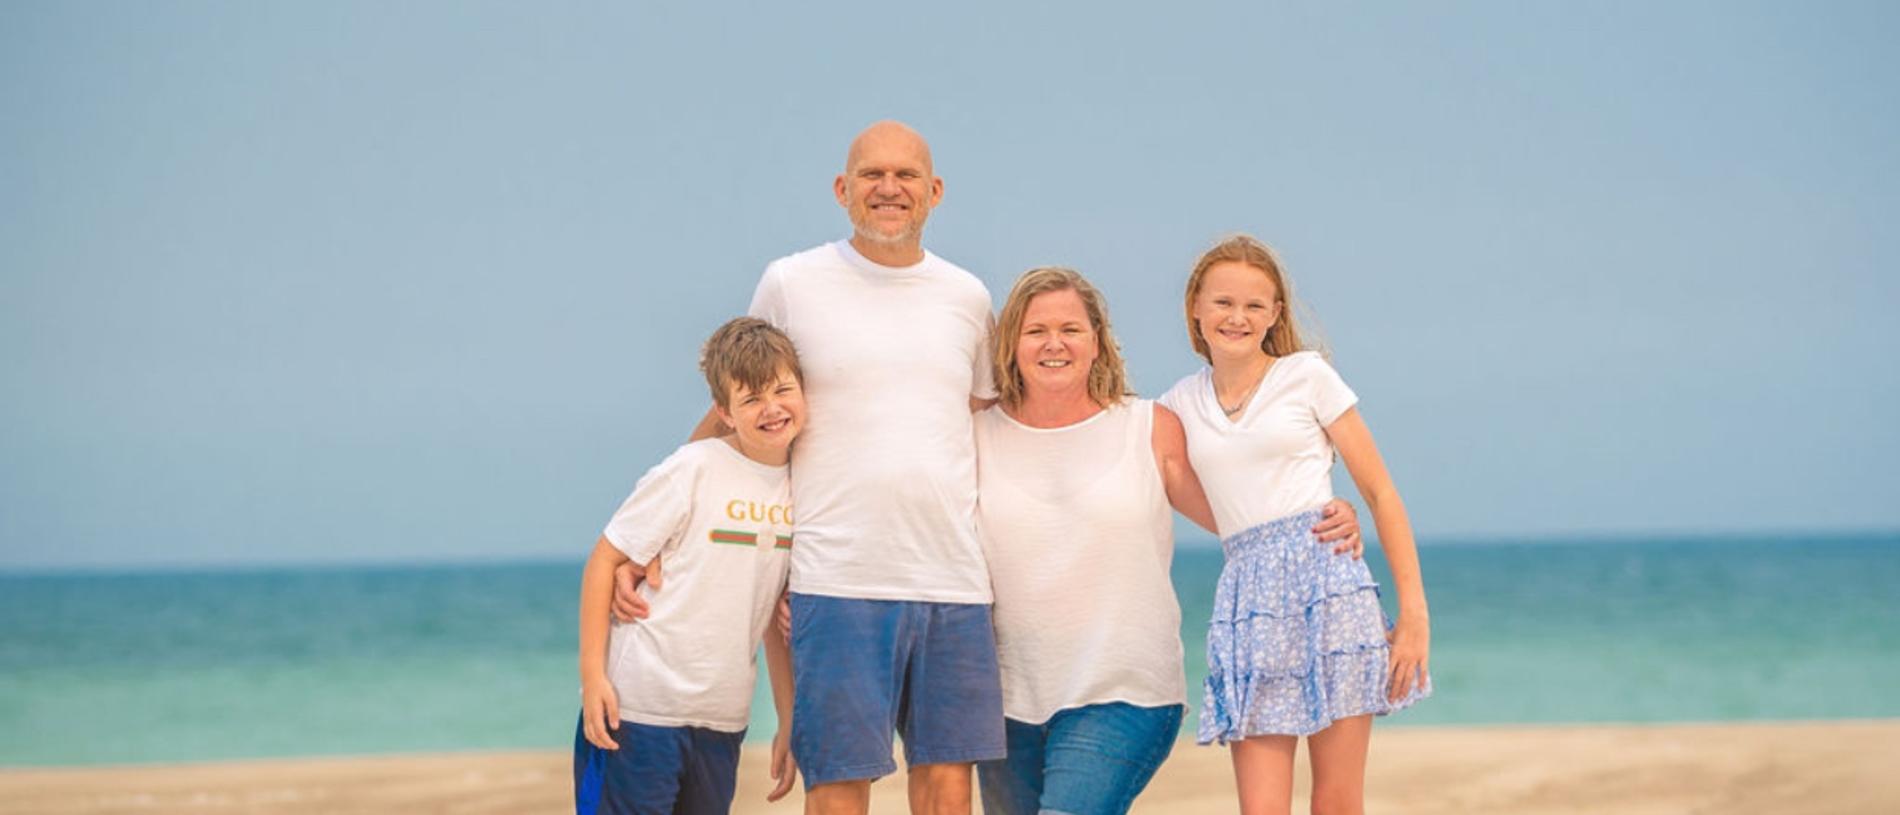 The Bertons are one of many Australian families impacted by prostate cancer as one man is diagnosed every 30 minutes. Picture: Supplied via NCA NewsWire